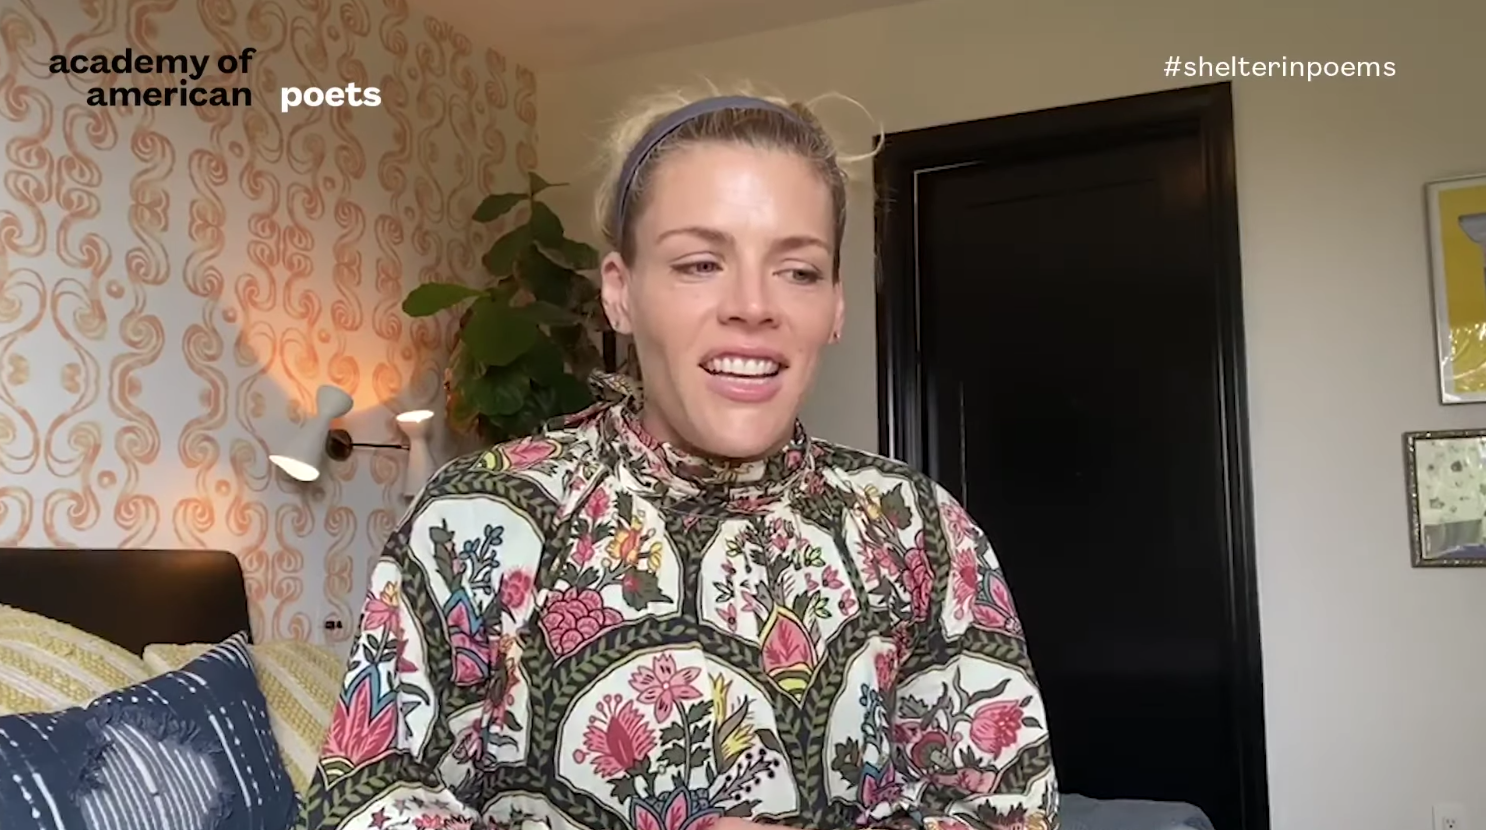 Watch Busy Philipps read "Thanks" here.